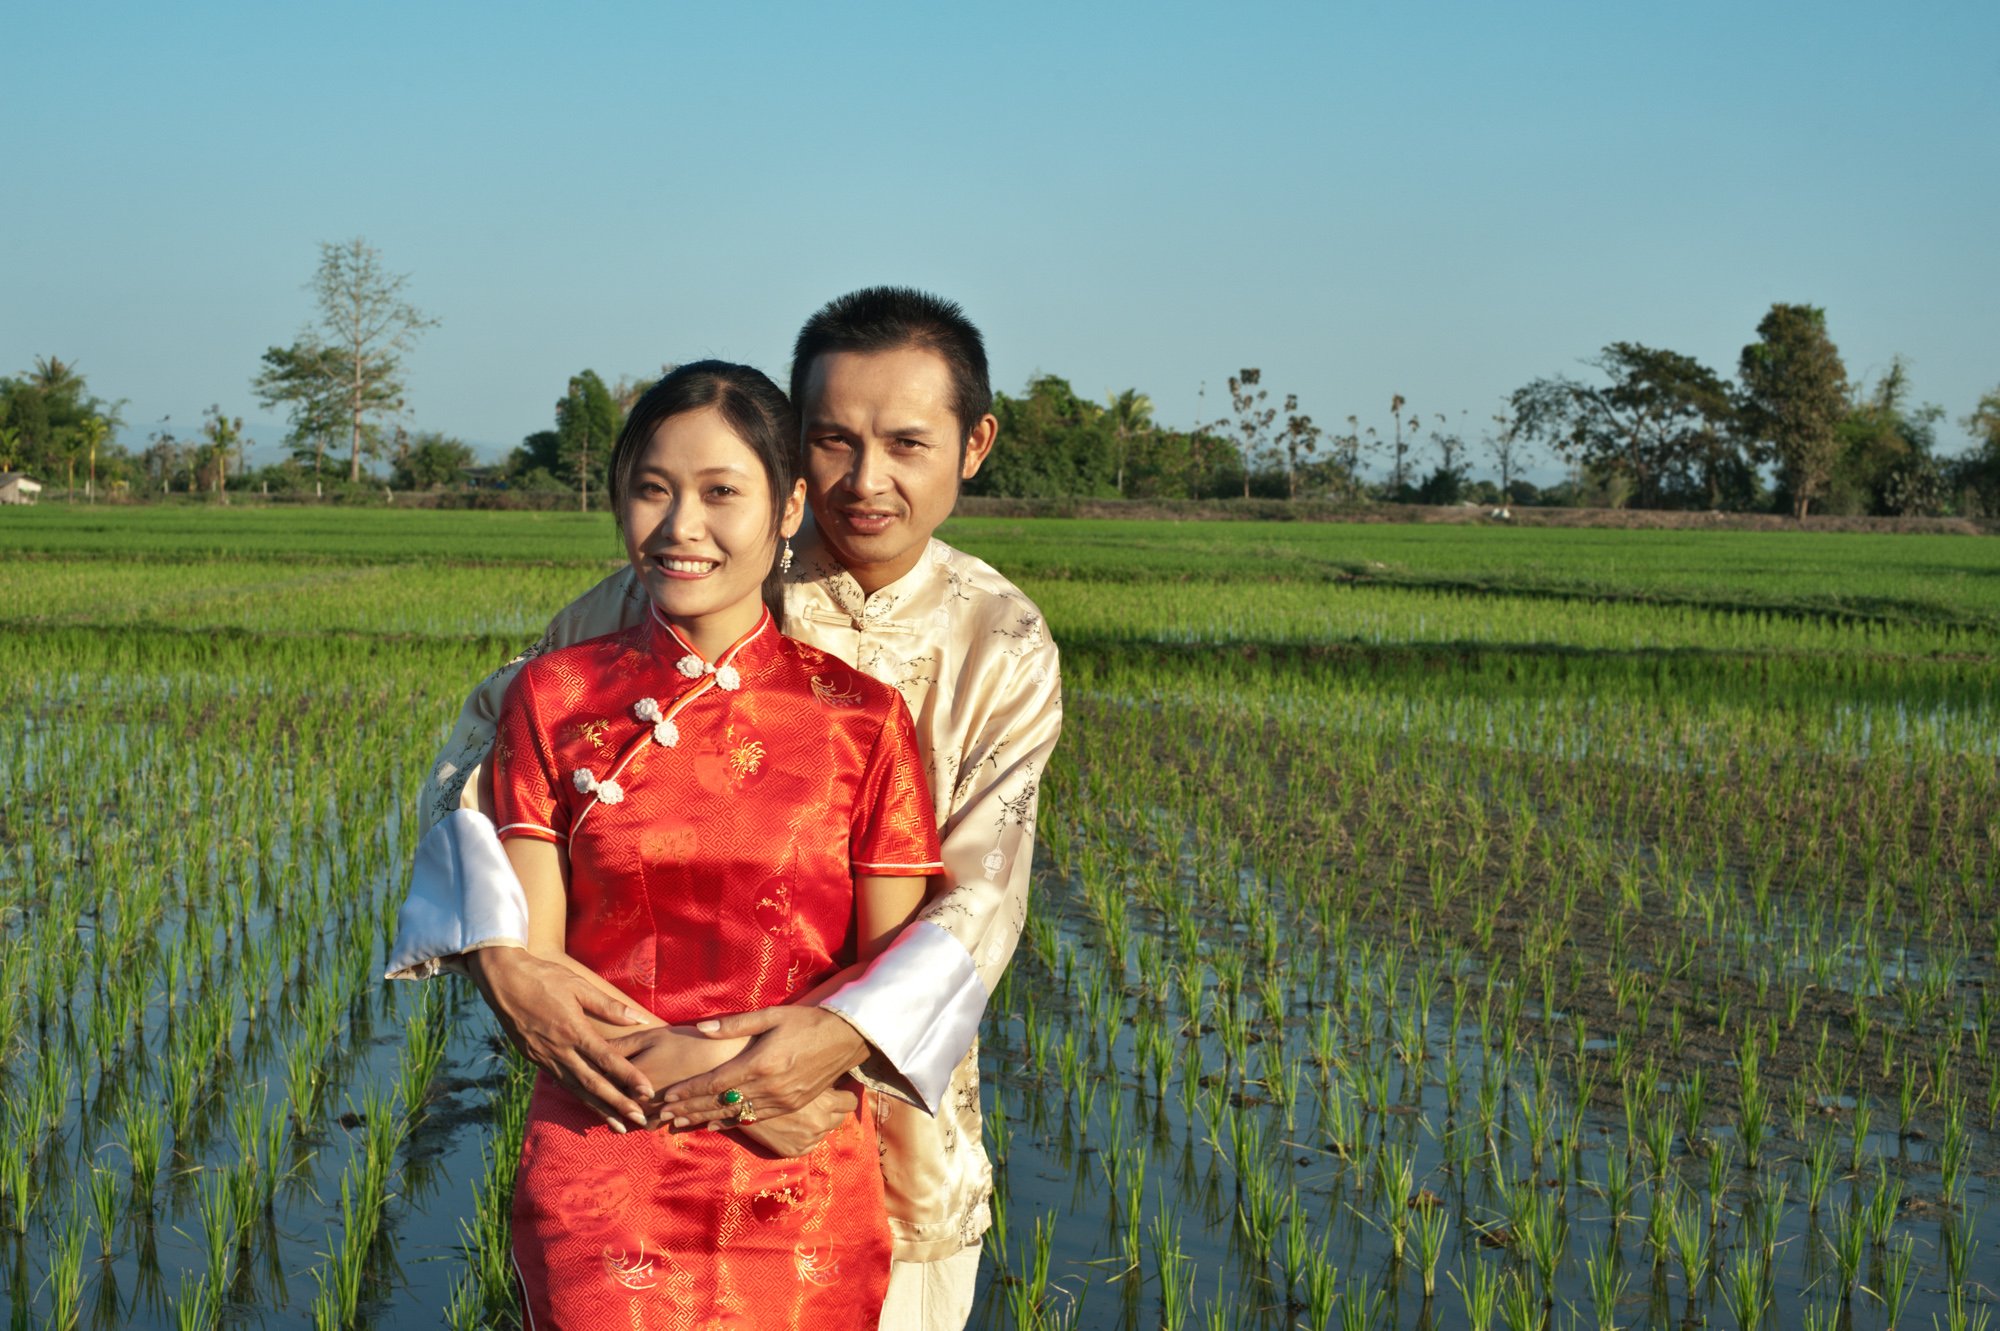 Asian Couple in the Fields - storytelling with digital photos